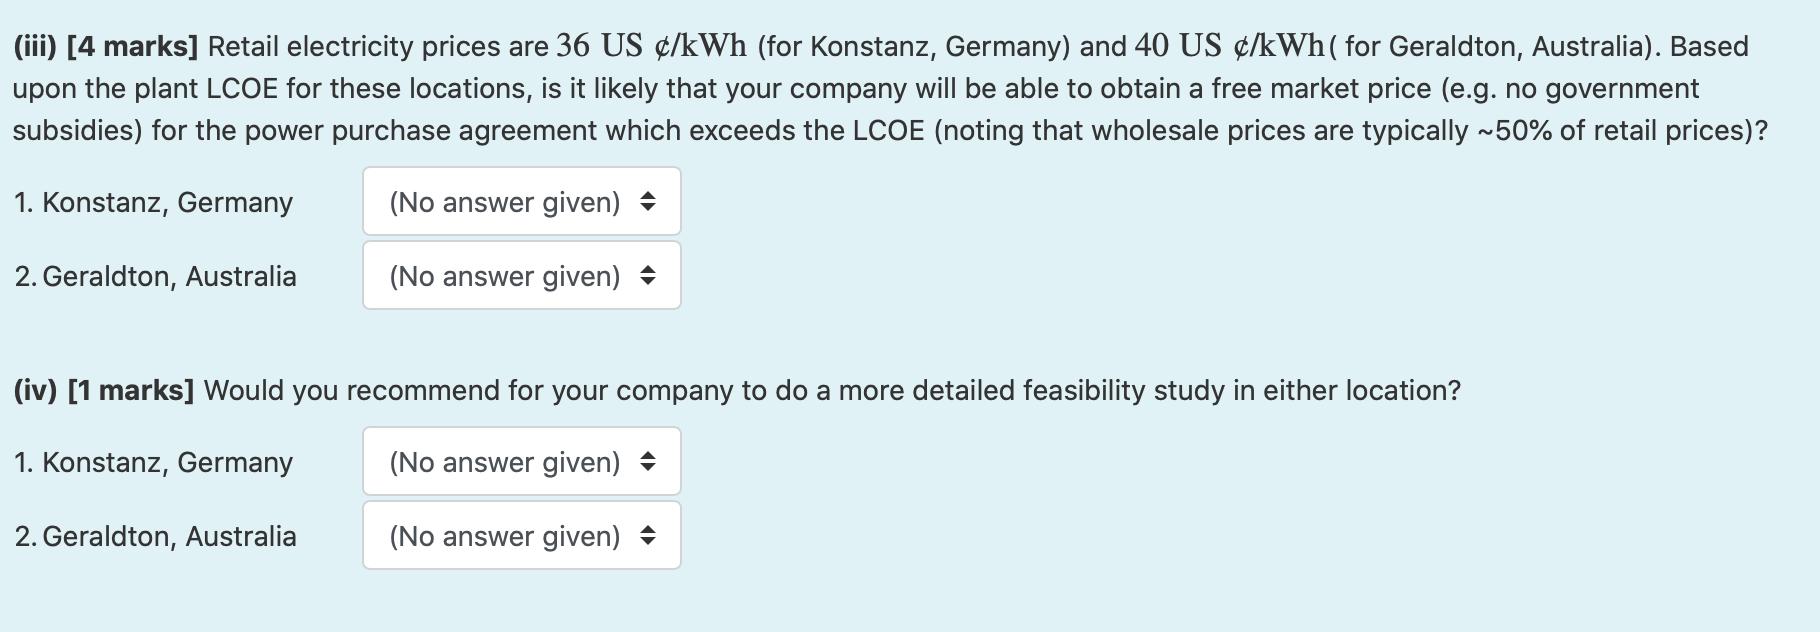 (iii) [4 marks] Retail electricity prices are 36 US ¢/kWh (for Konstanz, Germany) and 40 US ¢/kWh( for Geraldton, Australia).